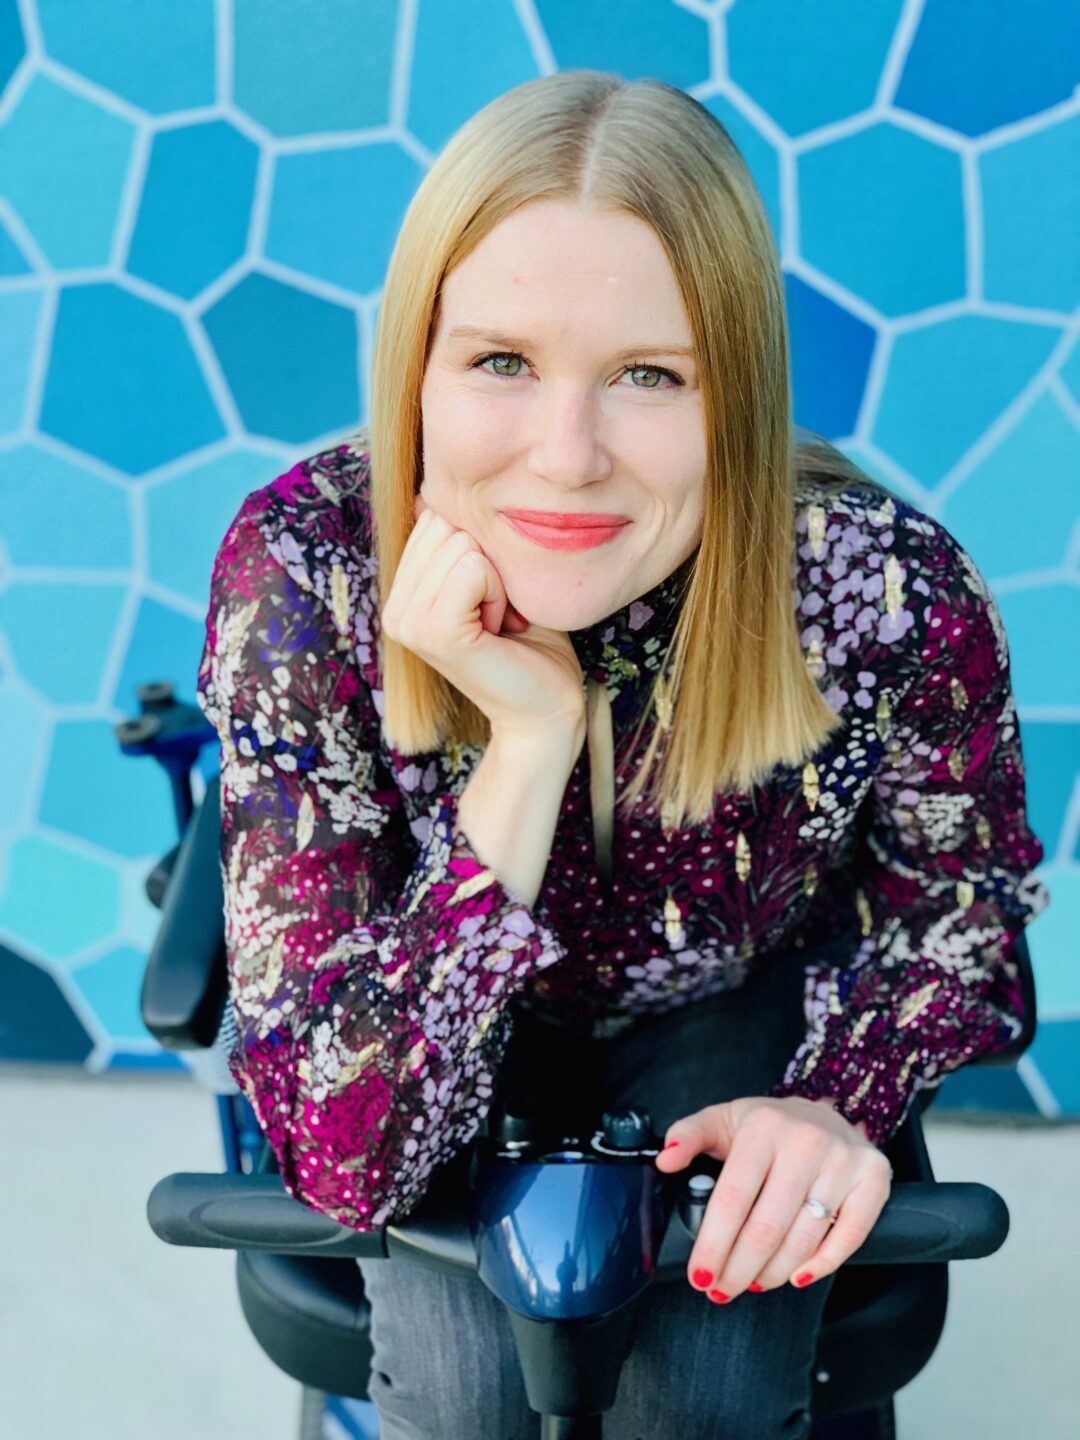 a white woman with blonde hair wearing a purple blouse and sitting in her mobility scooter in front of a wall with blue geometric shapes.